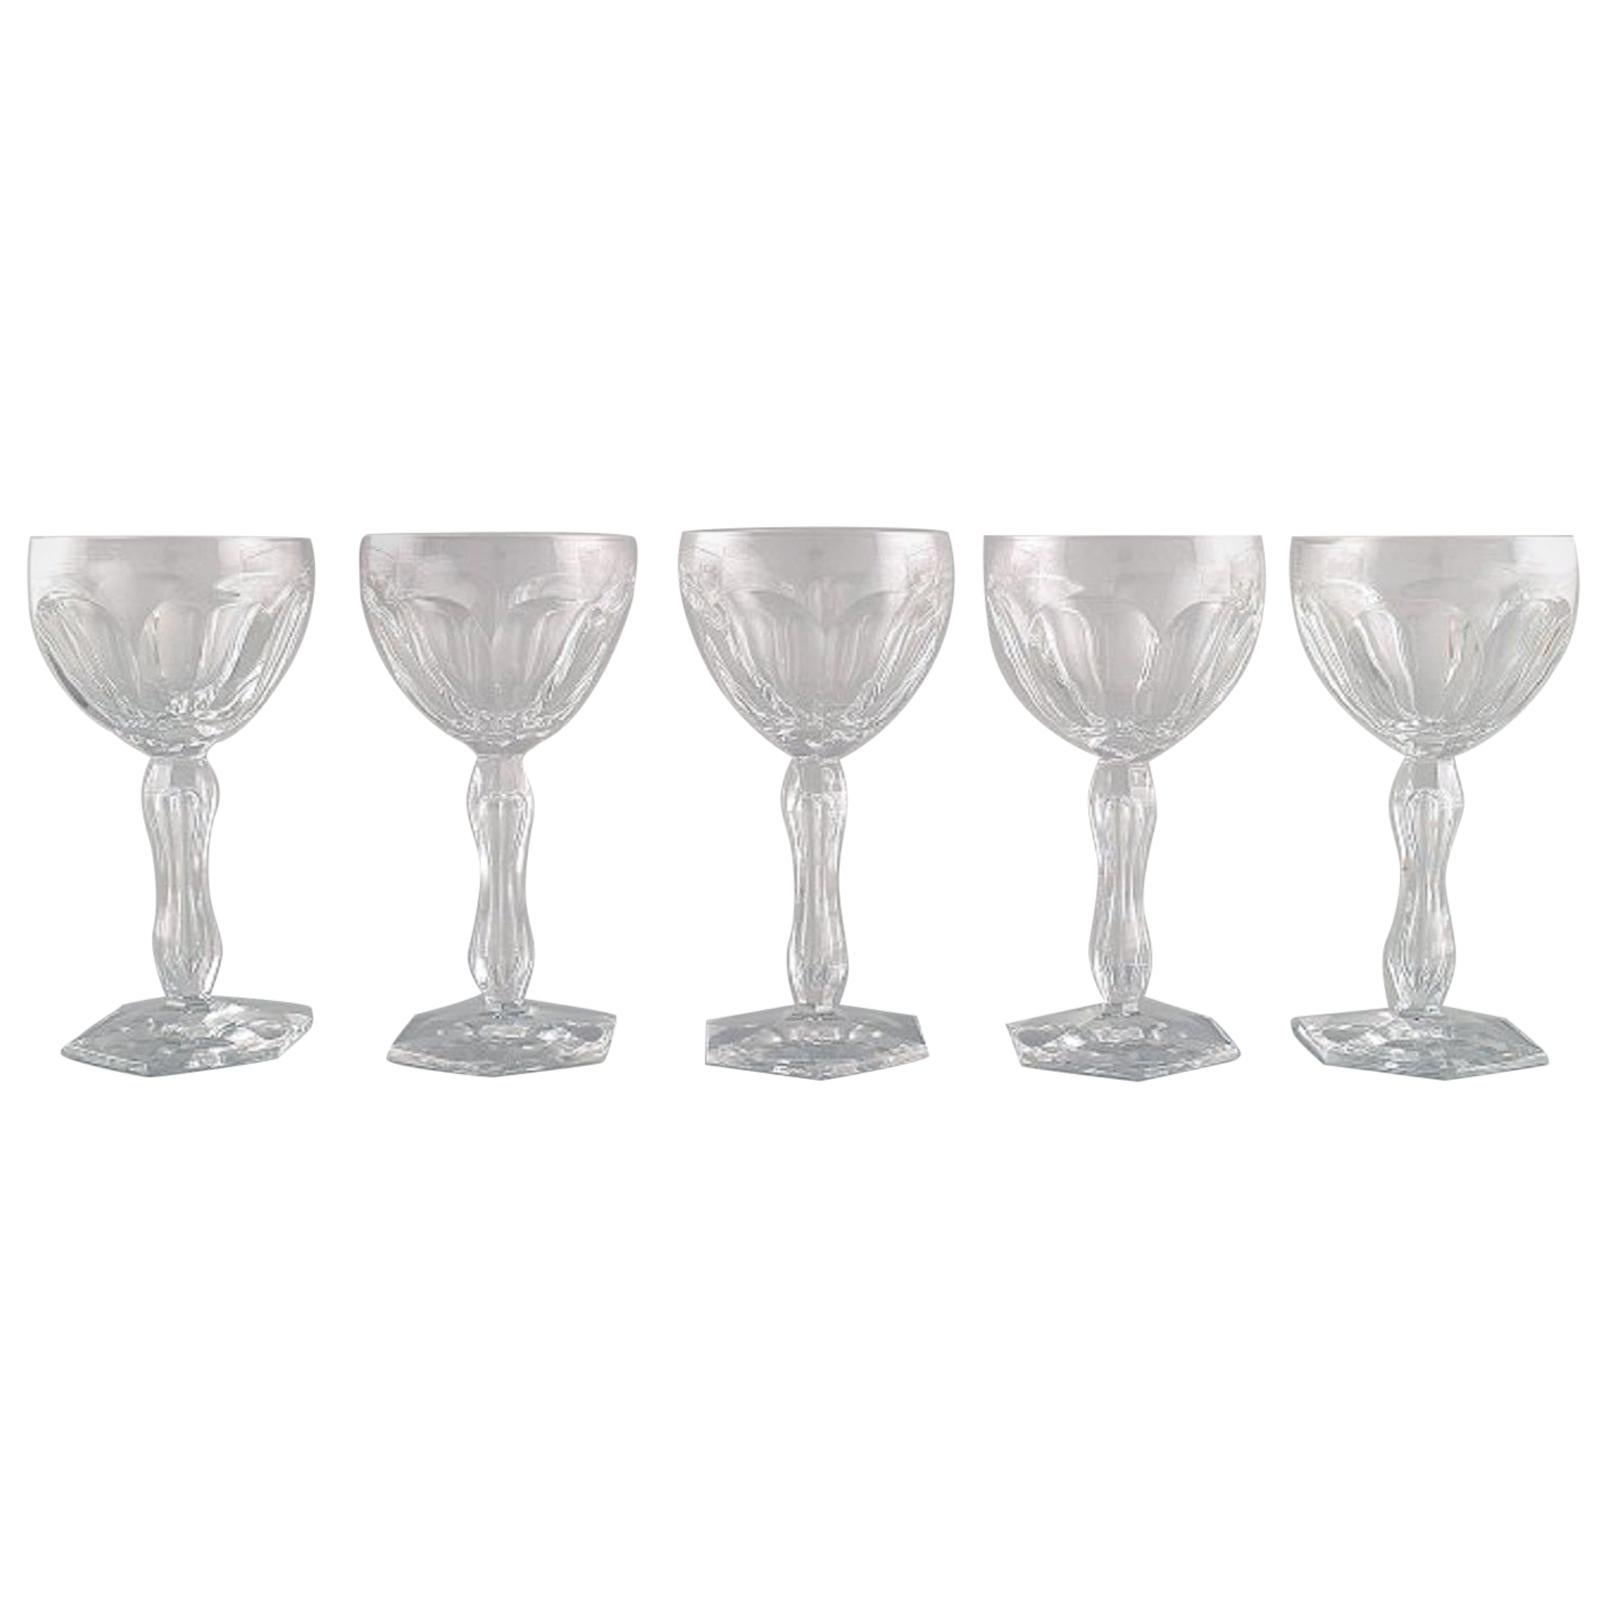 Val St. Lambert, Belgium, Five Lalaing Glasses in Mouth Blown Crystal Glass